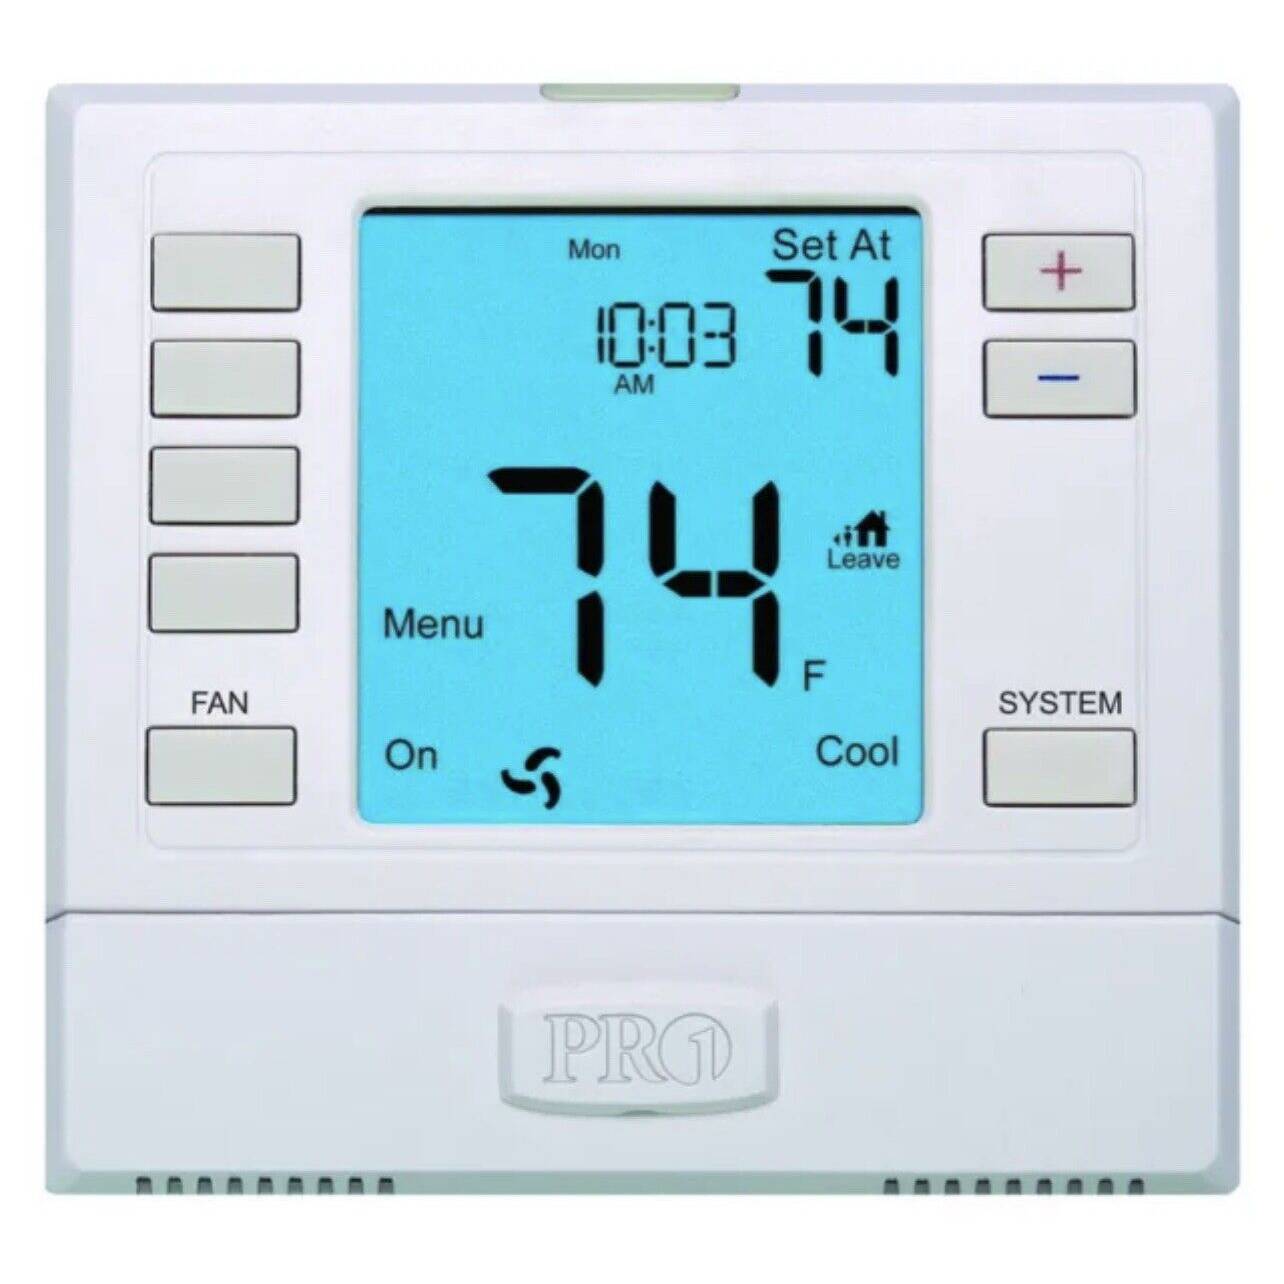 T755S Pro1 IAQ Programmable Thermostat